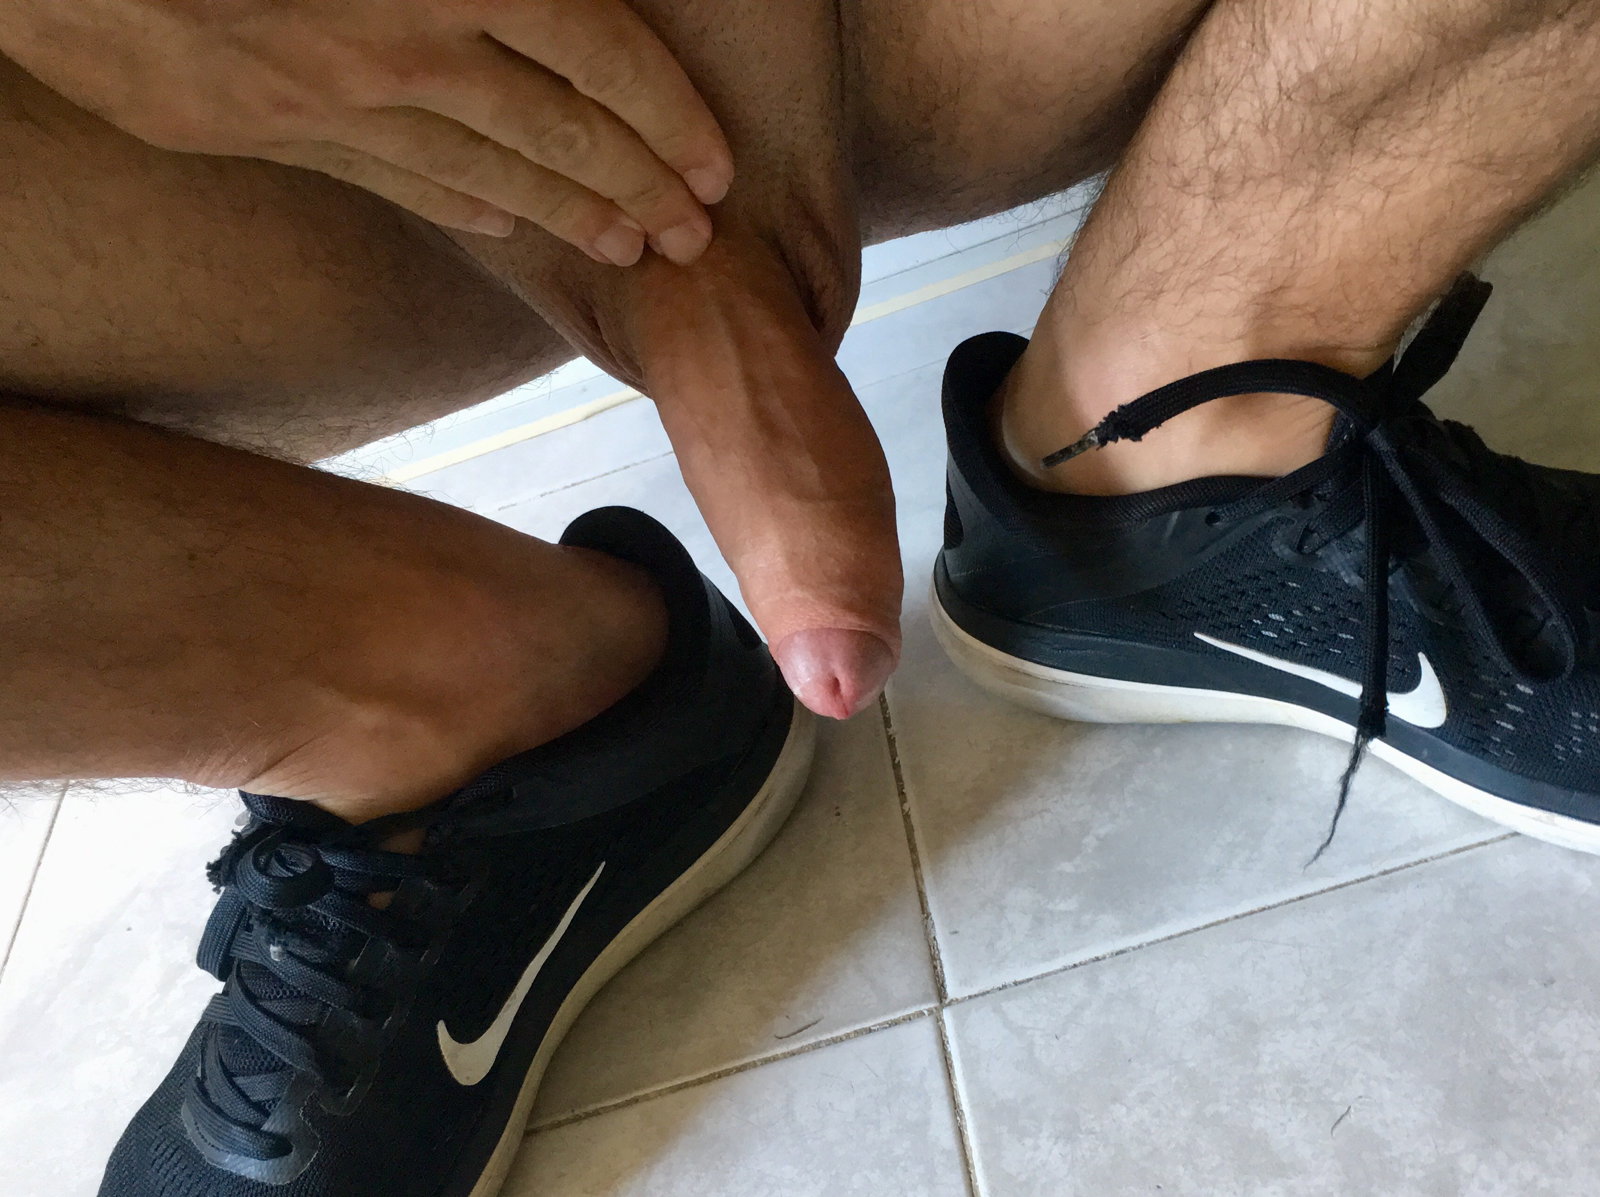 Photo by Fan in Heat with the username @faninheat, who is a verified user,  December 18, 2018 at 11:02 PM. The post is about the topic Gay and the text says '#faninheat #amateur #gay #gayamateur #gayporn #cock #smoothcock #uncut #foreskin'